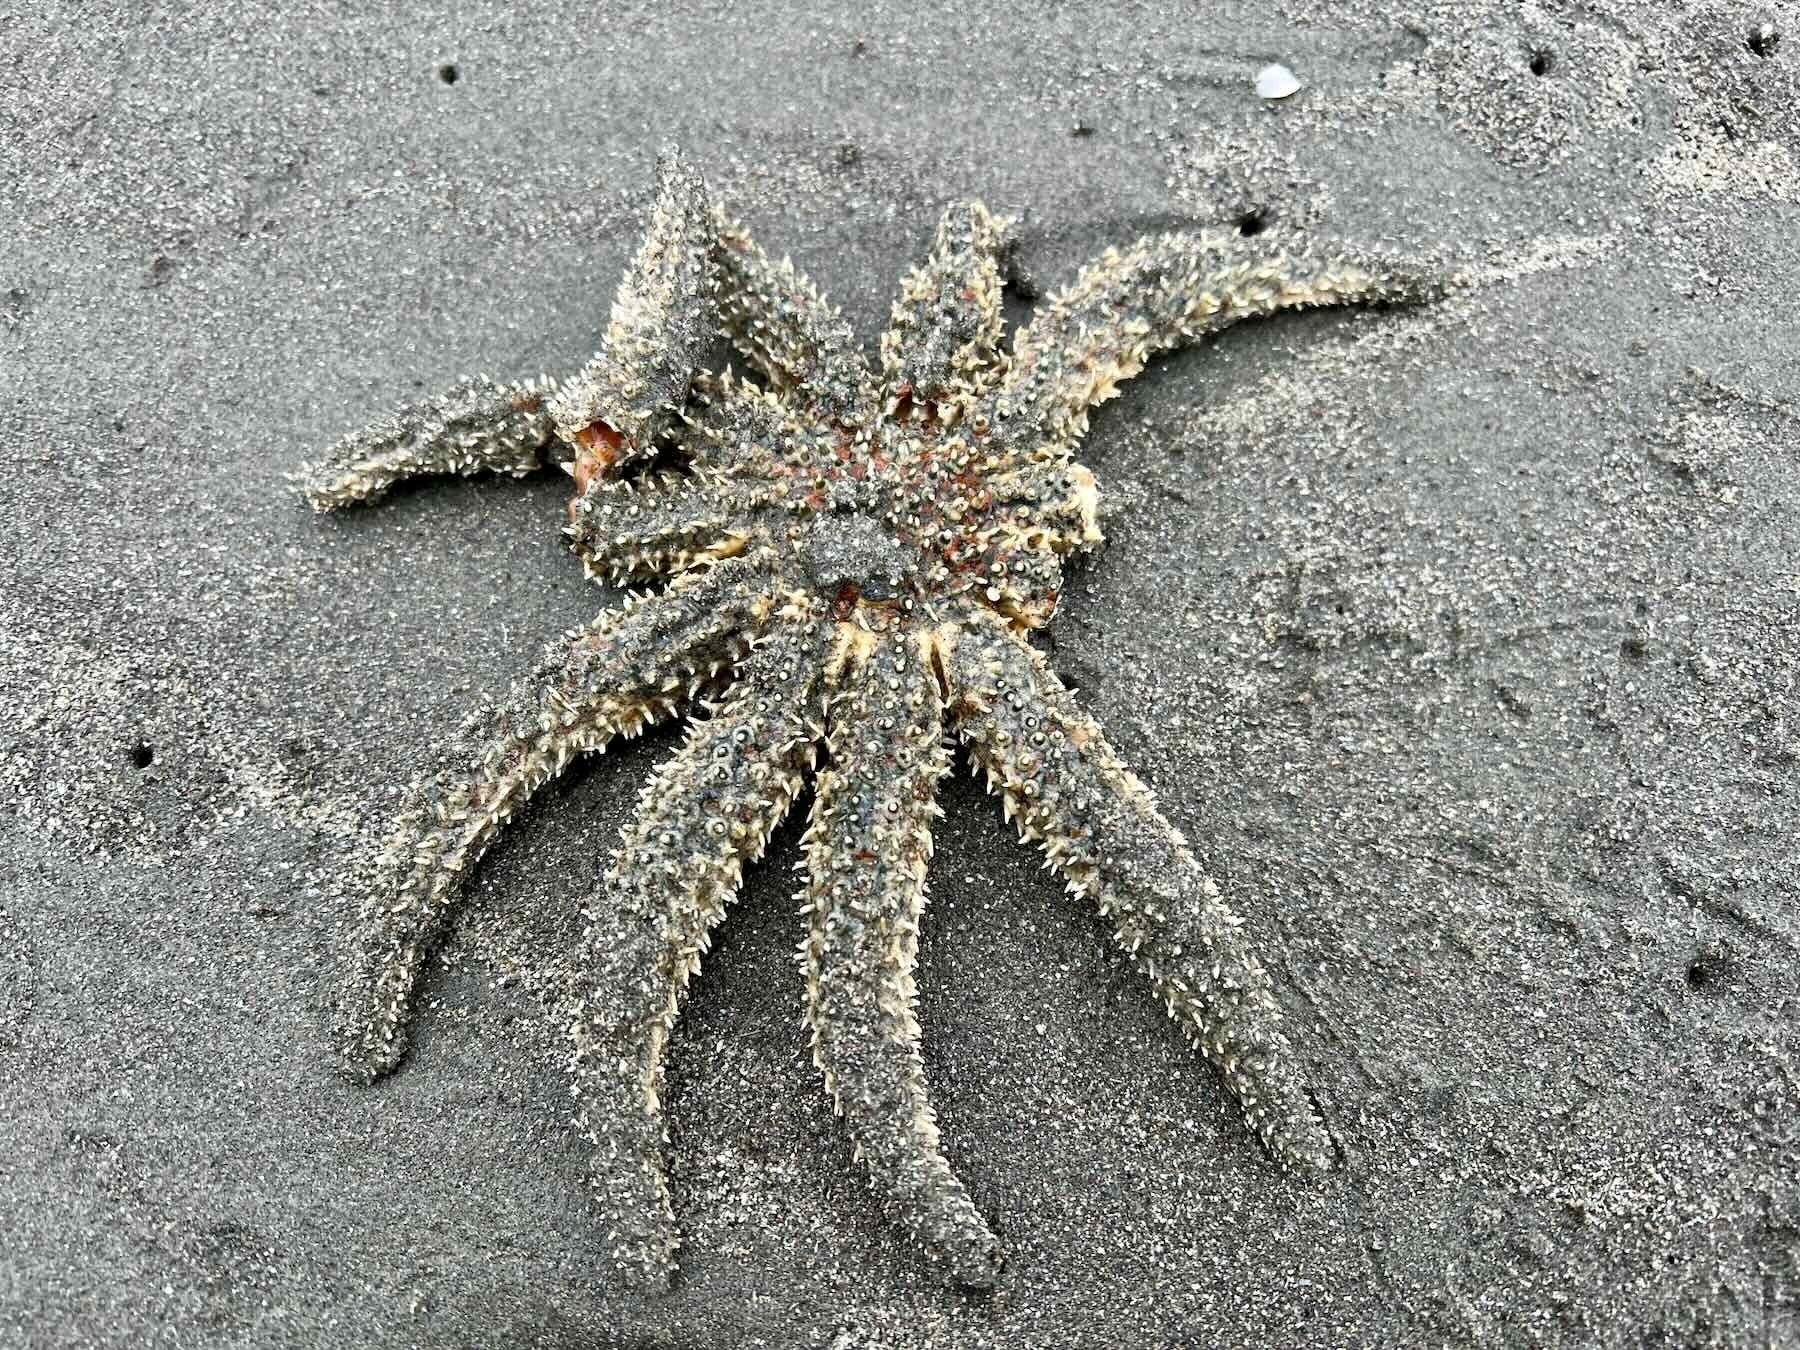 Eleven-Armed Sea Star, with one arm broken and two missing, on sand. 